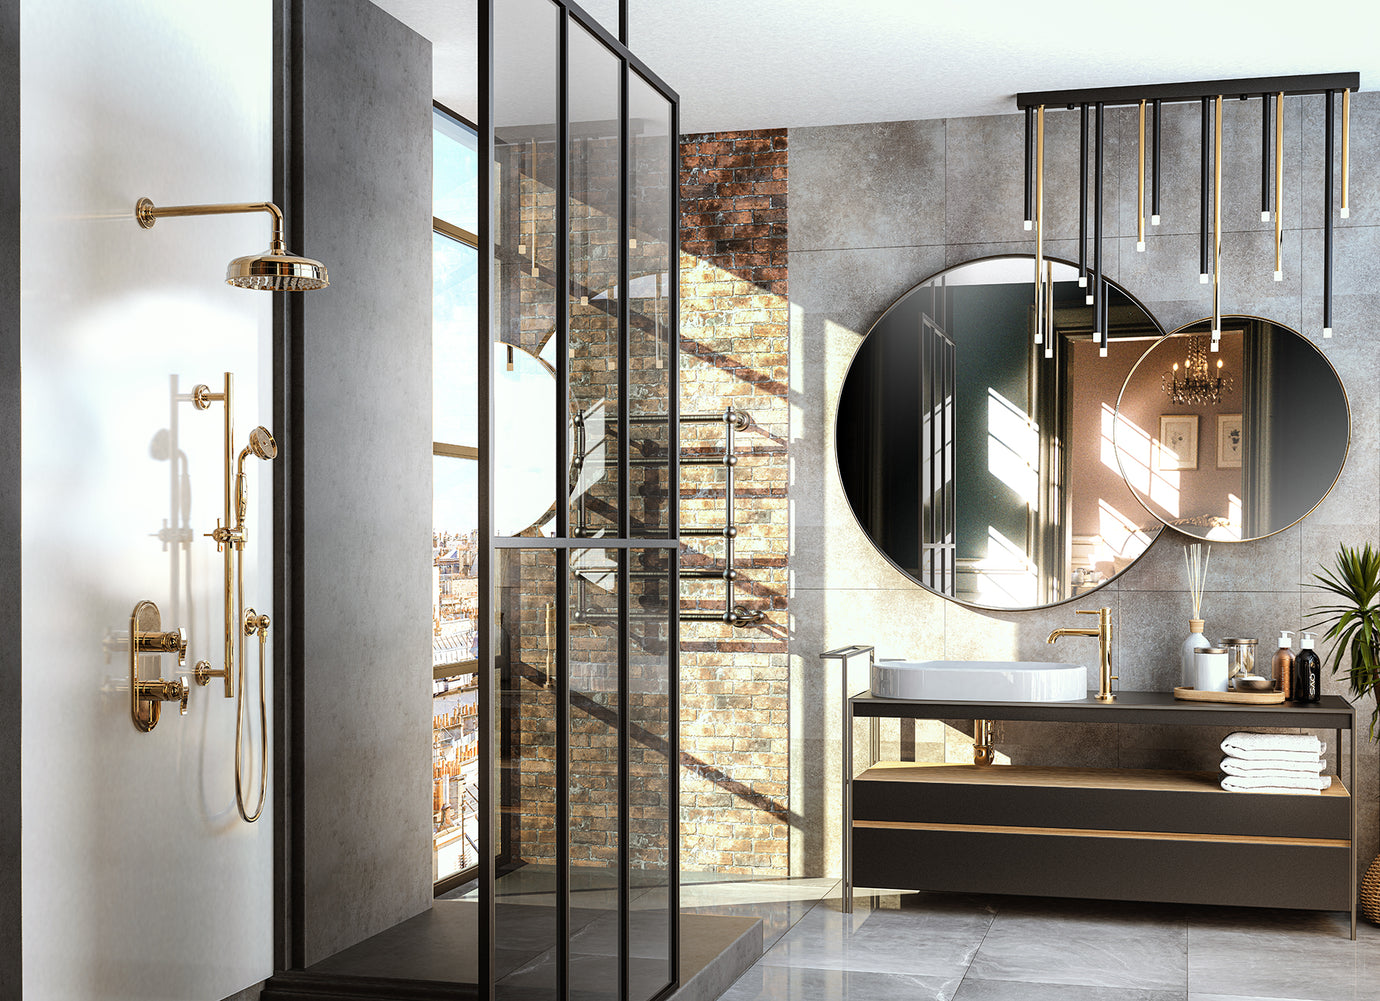 Discovering Luxury: The Premier Destination for High-End Kitchen and Bathroom Finishes in Miami